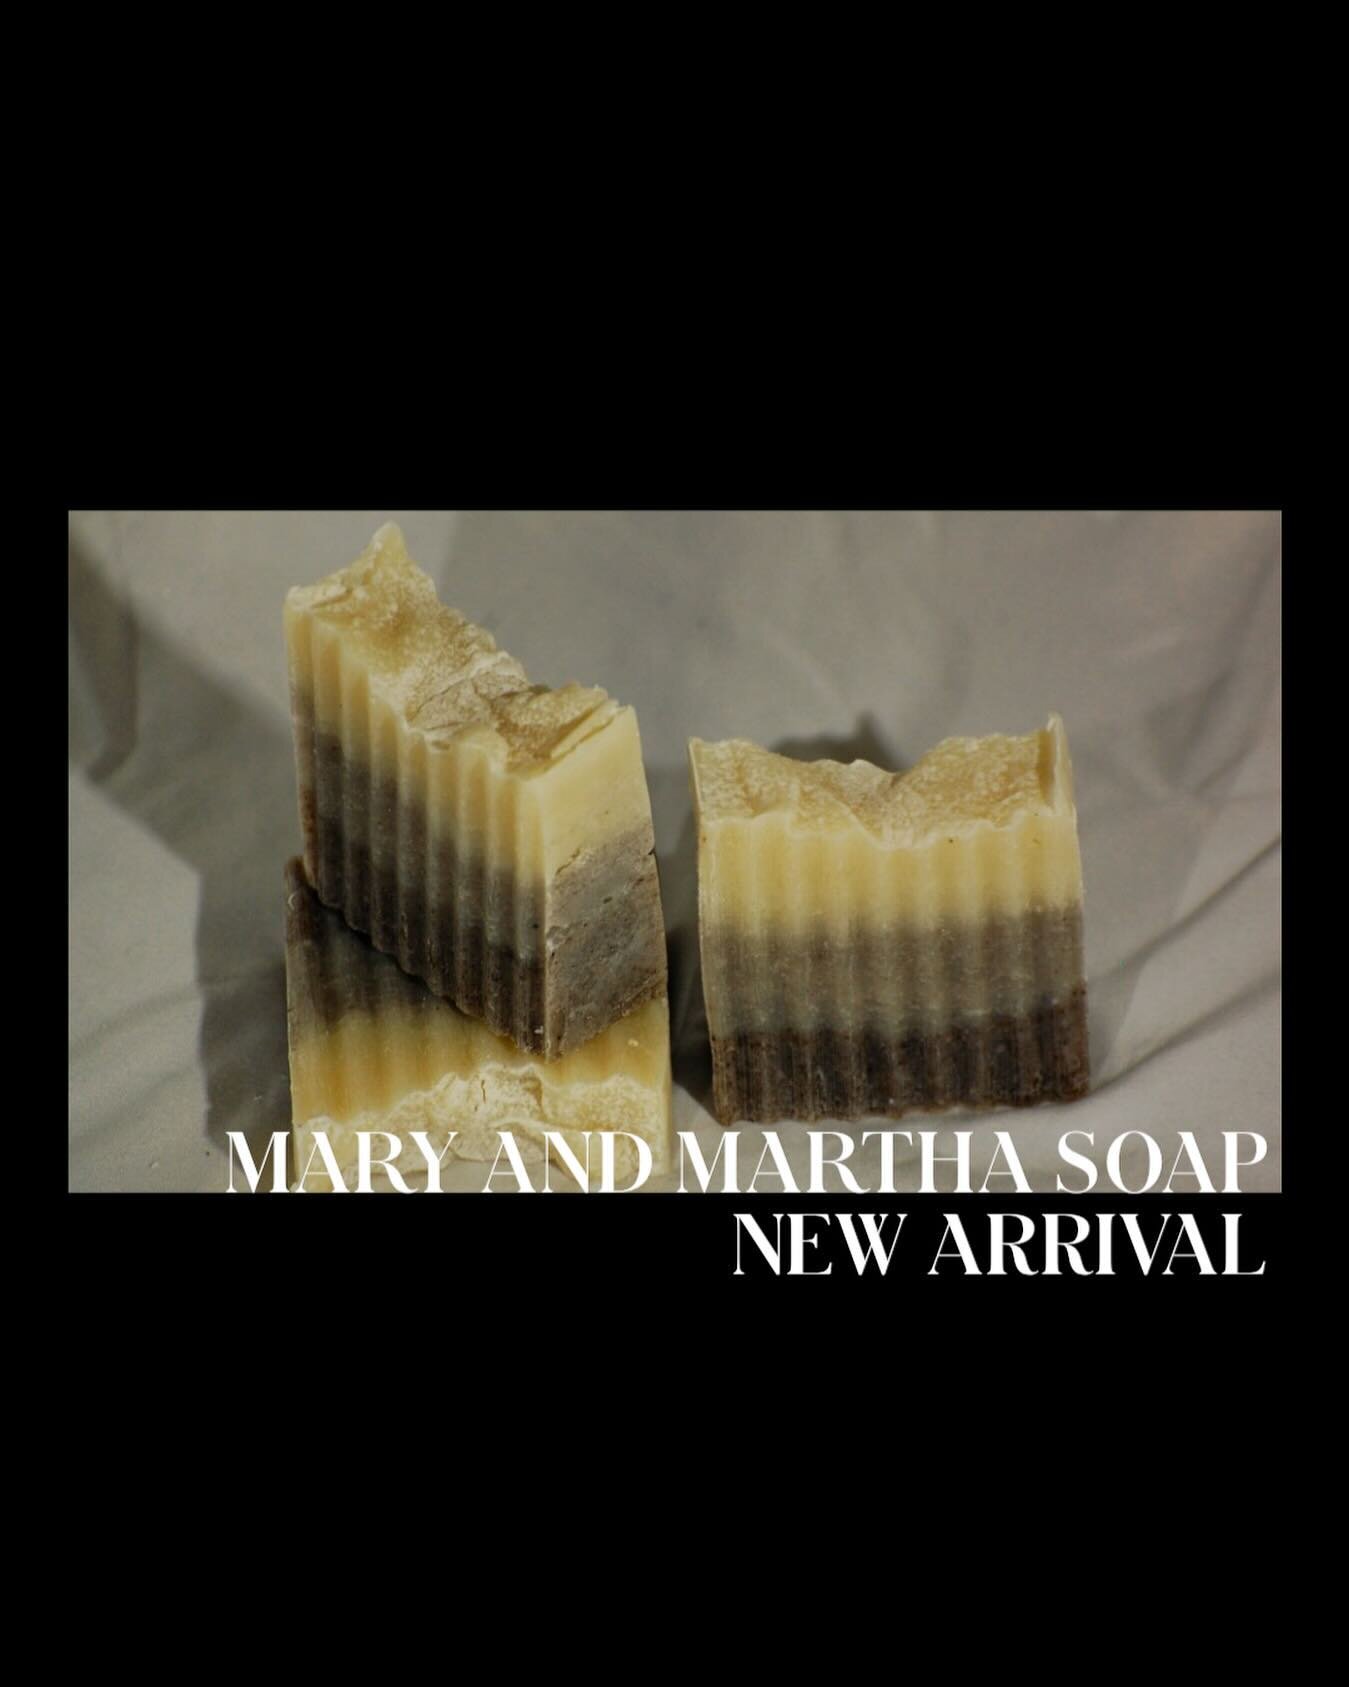 Today&rsquo;s featured product is our Mary and Martha Soap. This vanilla scented soap is made with shea butter to provide extra moisturizing qualities. It was inspired by the homemaking qualities of Mary and Martha in the New Testament. It pairs perf